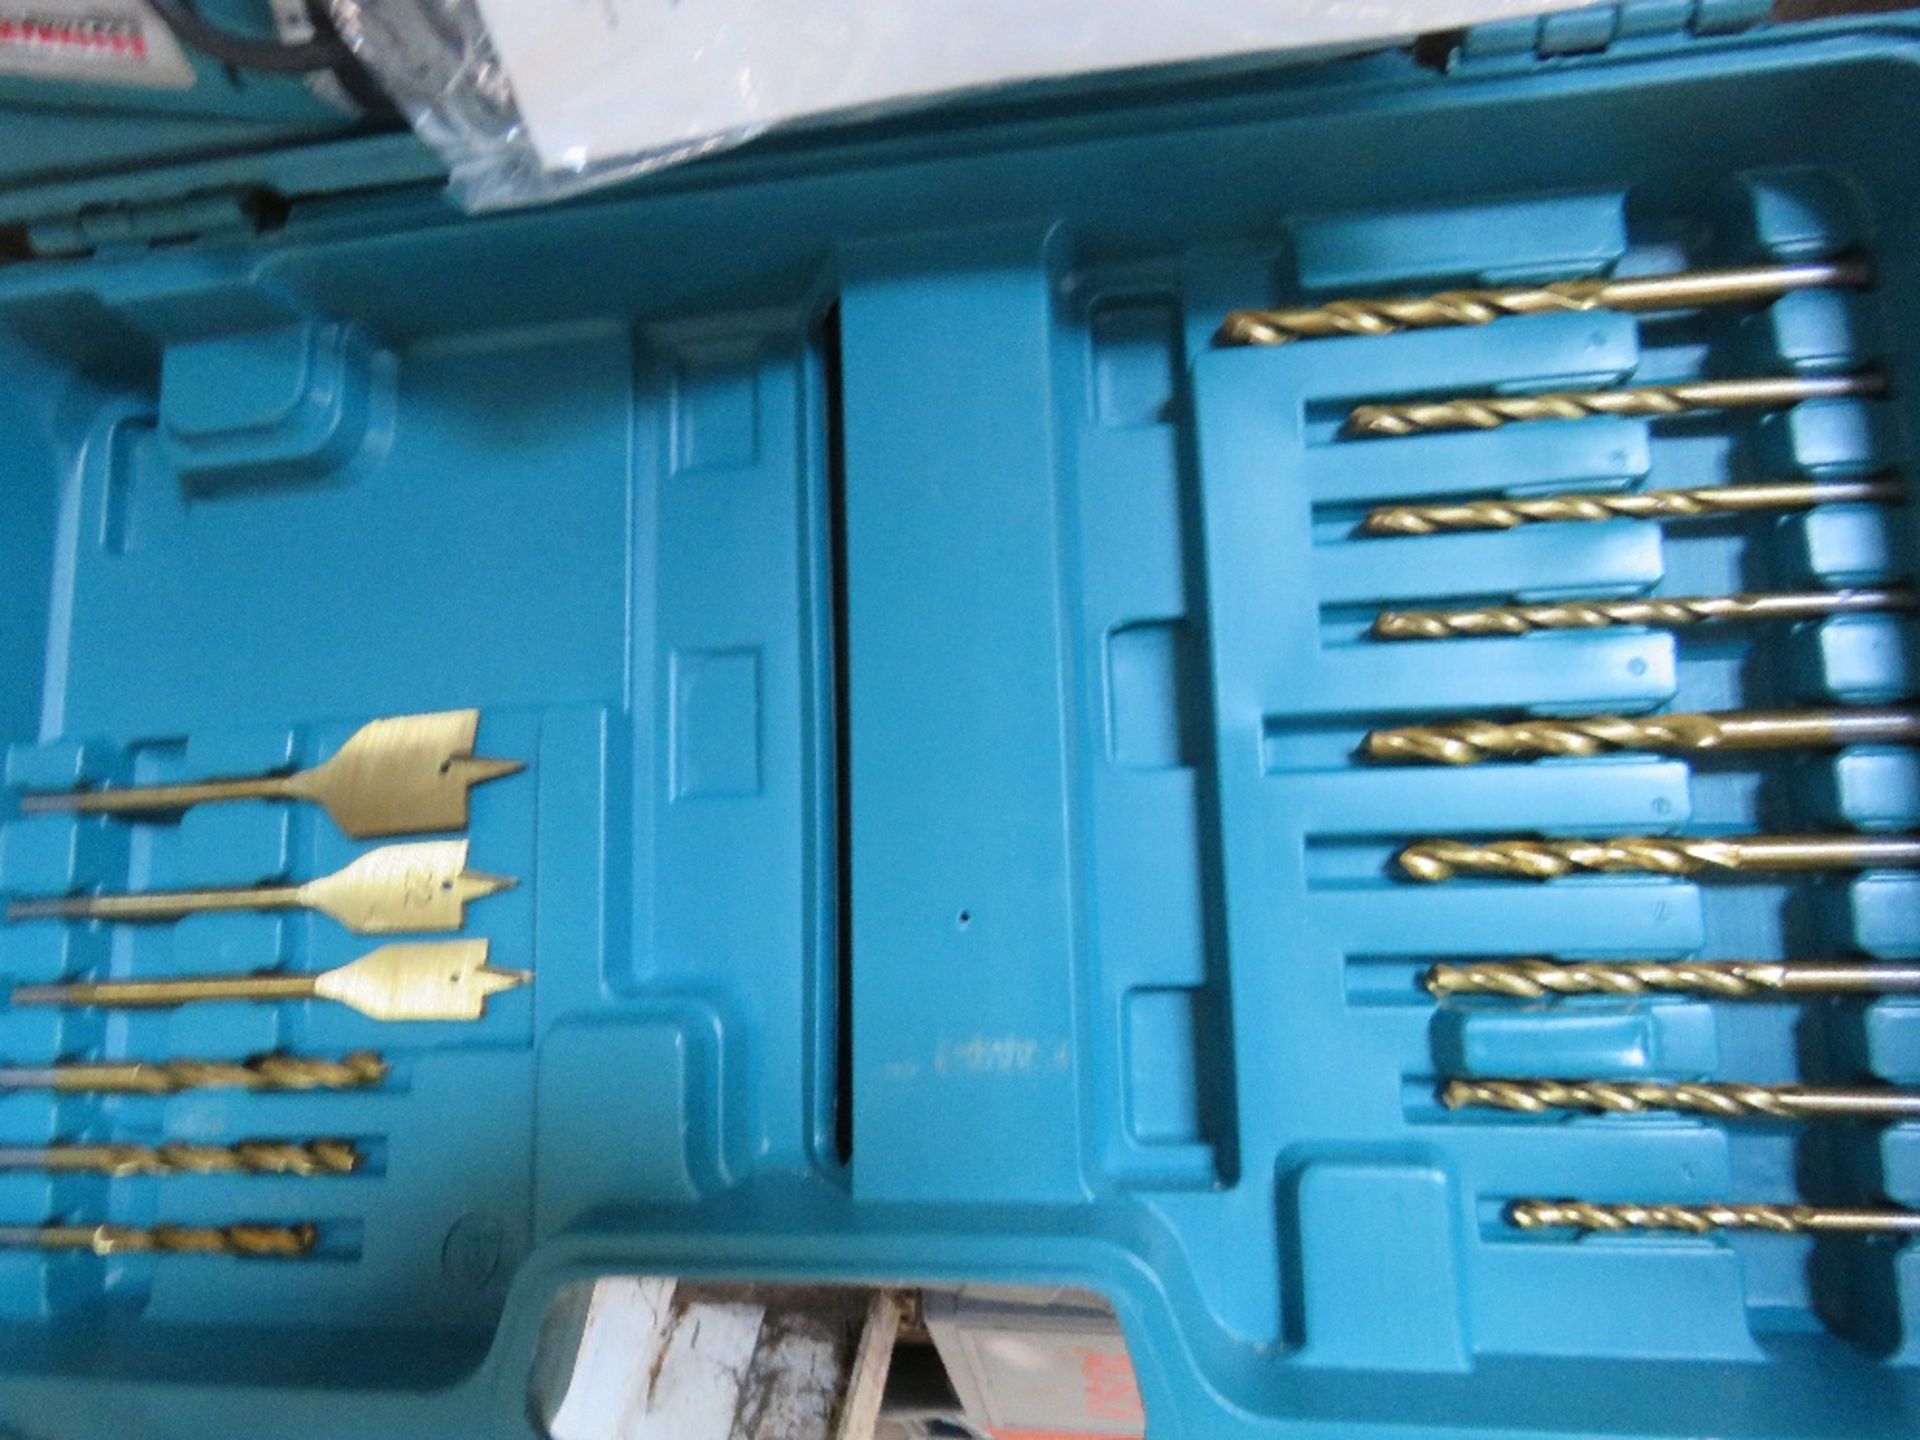 TWIN BATTERY DRILL SET, LITTLE USED - Image 3 of 3